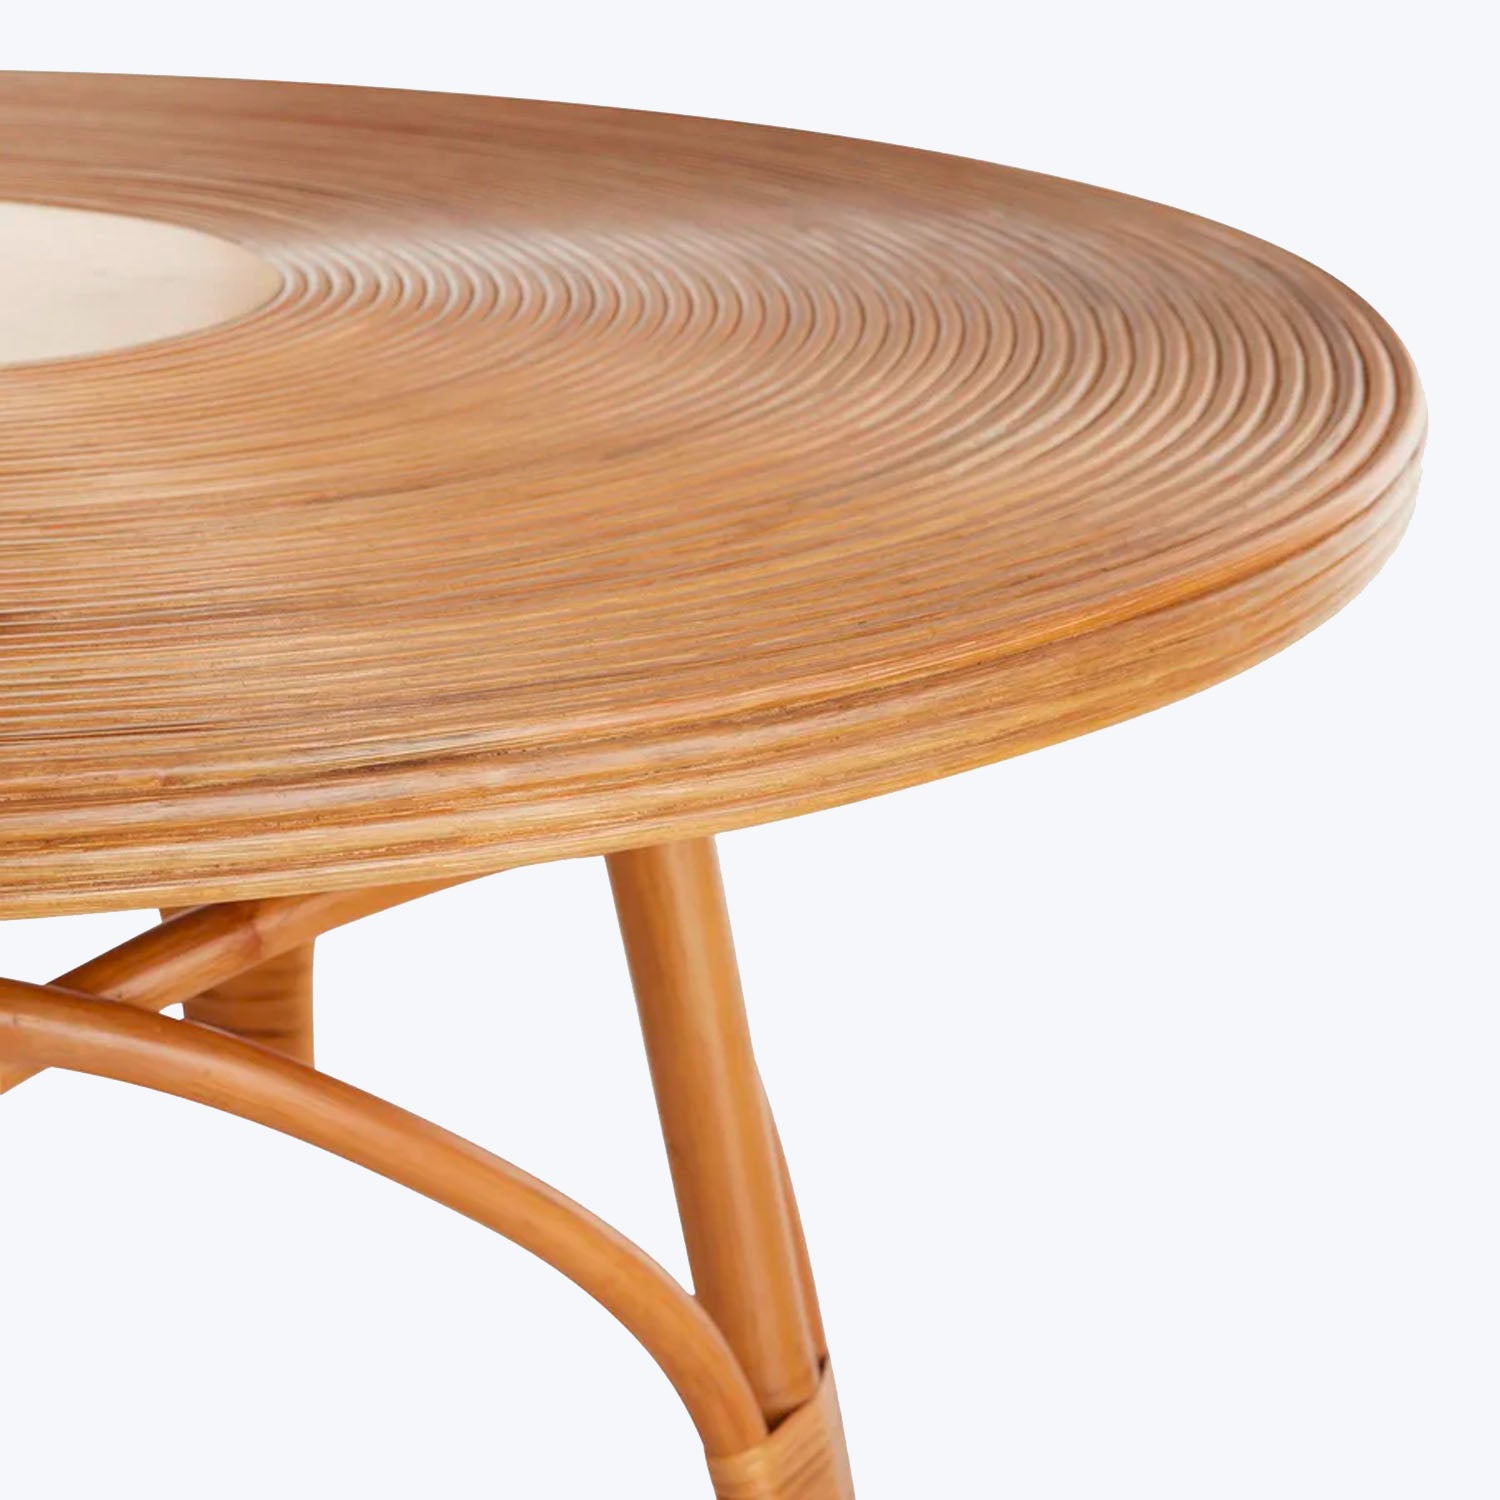 Modern wooden table with concentric ring pattern highlights natural grain.